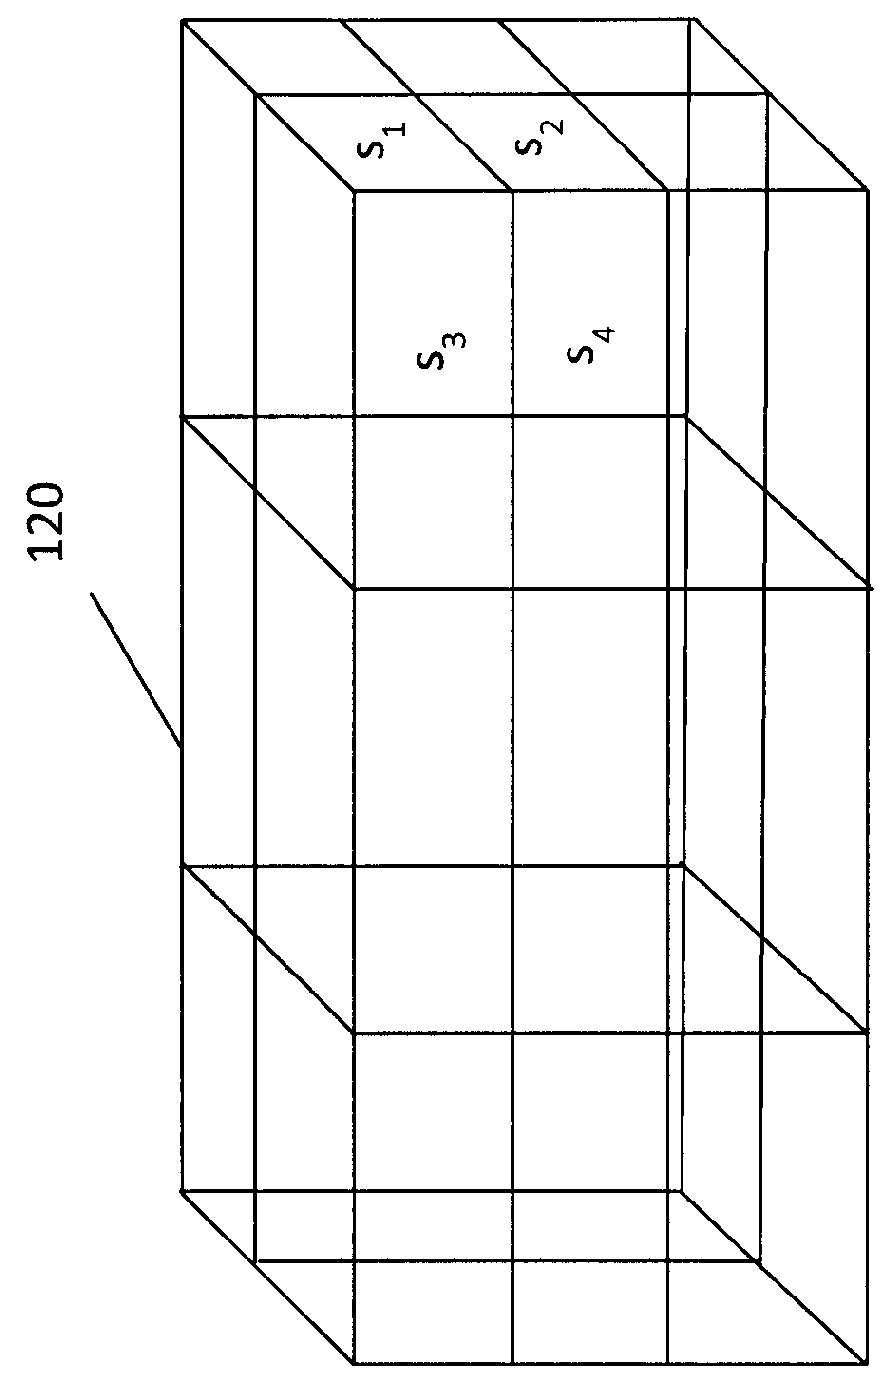 Method and apparatus for layout and format independent 3D audio reproduction